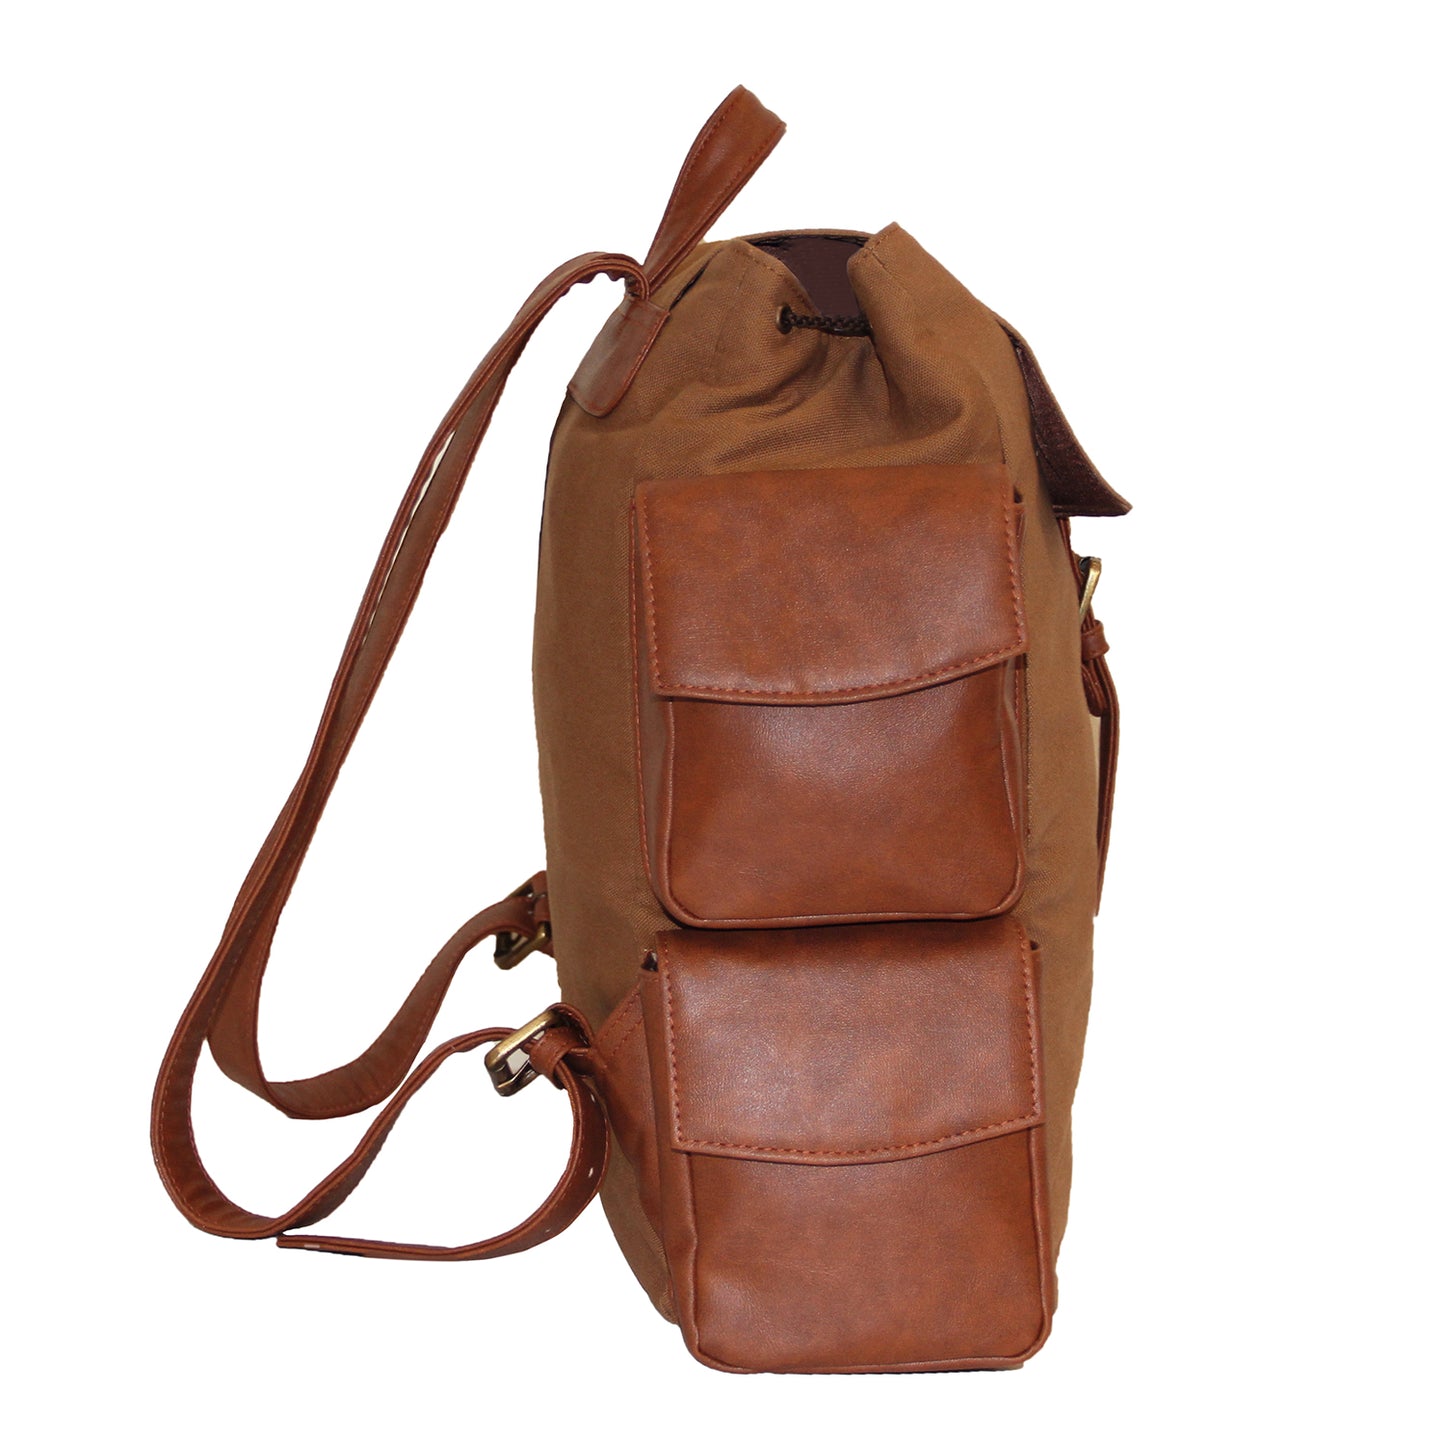 Brown Canvas Backpack